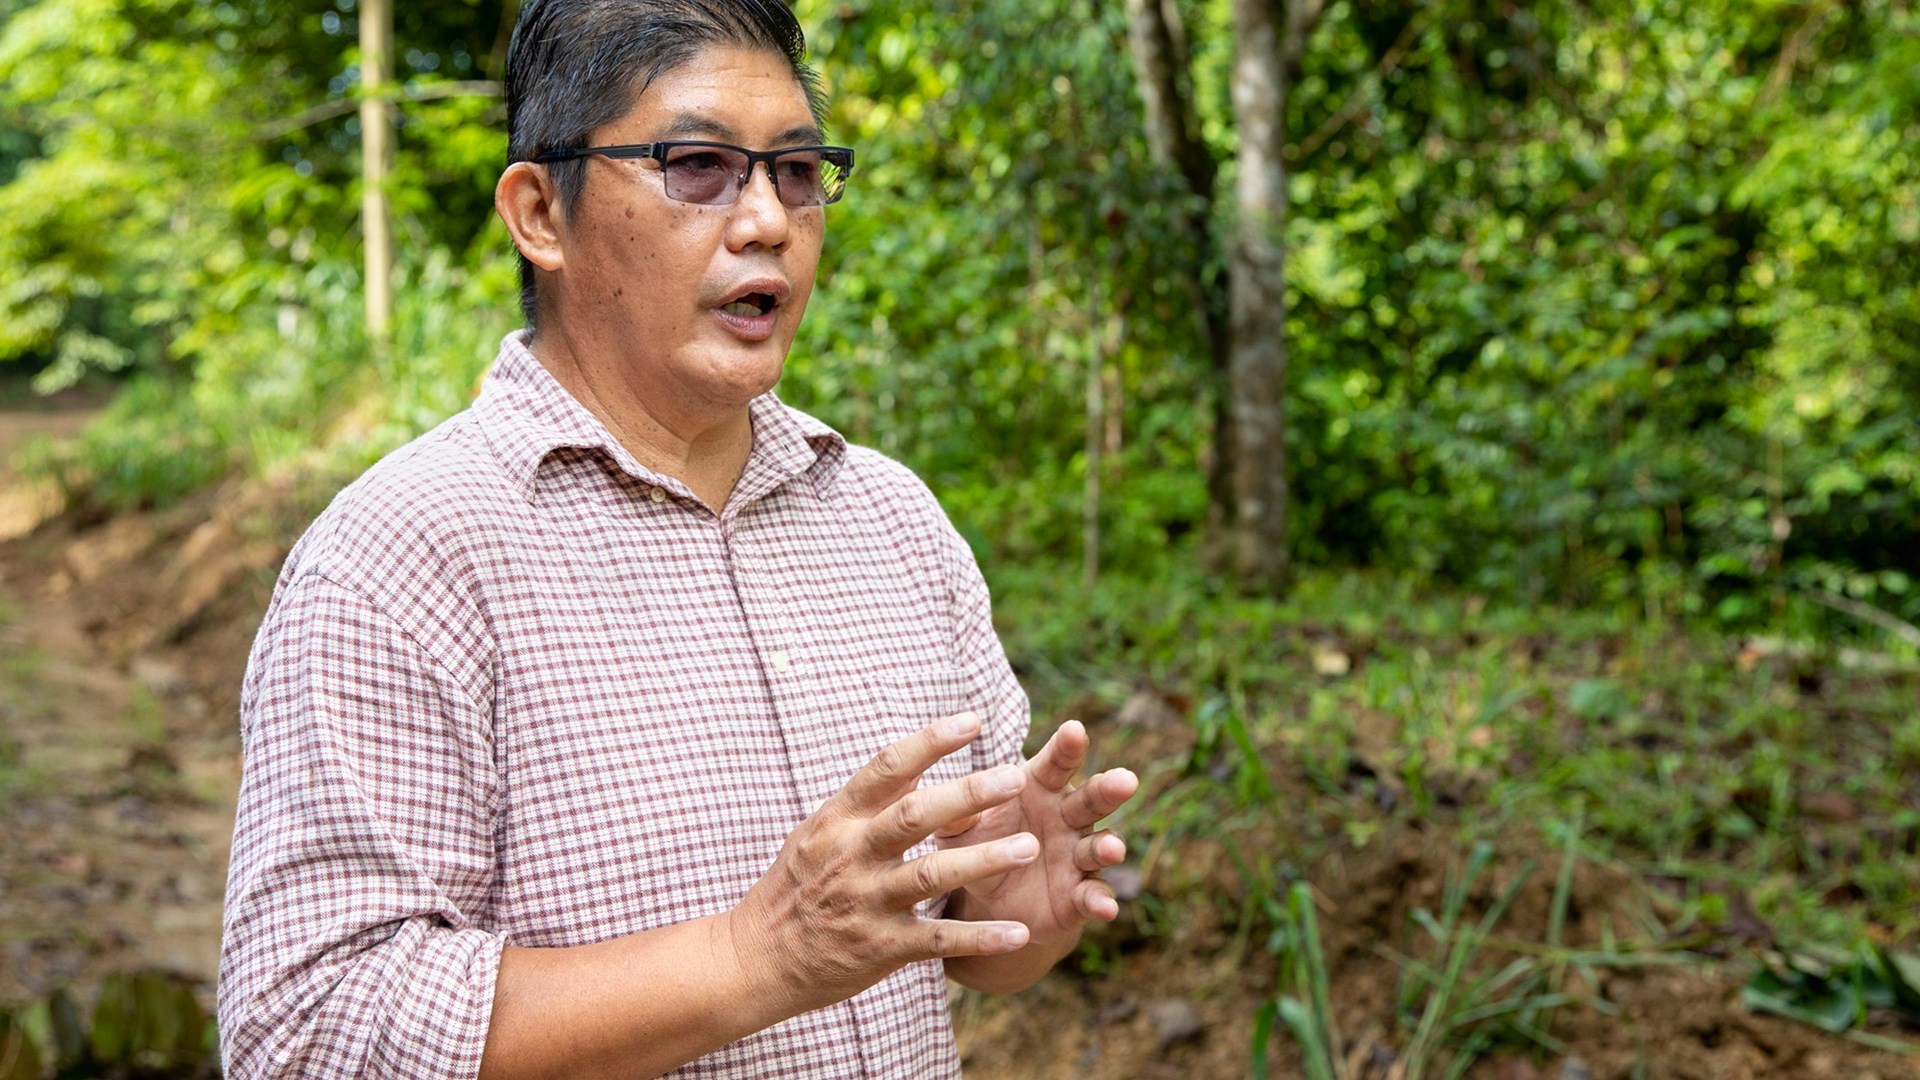 Man in shirt in rainforest talks and gestures with his hands.